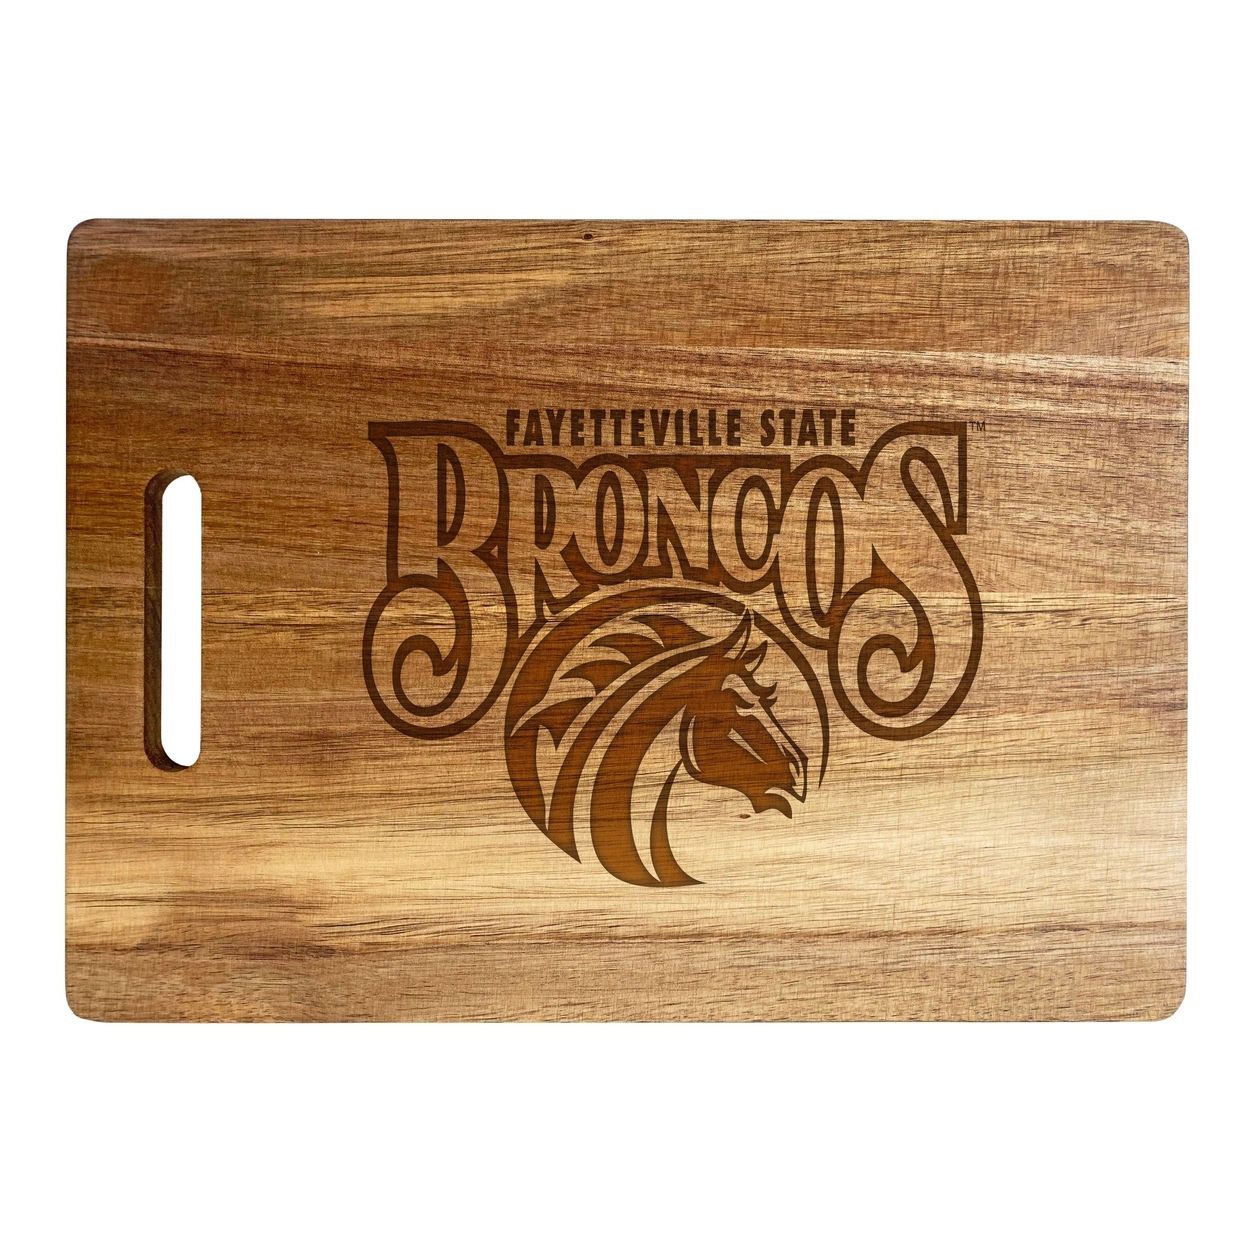 Fayetteville State University Engraved Wooden Cutting Board 10 X 14 Acacia Wood - Large Engraving